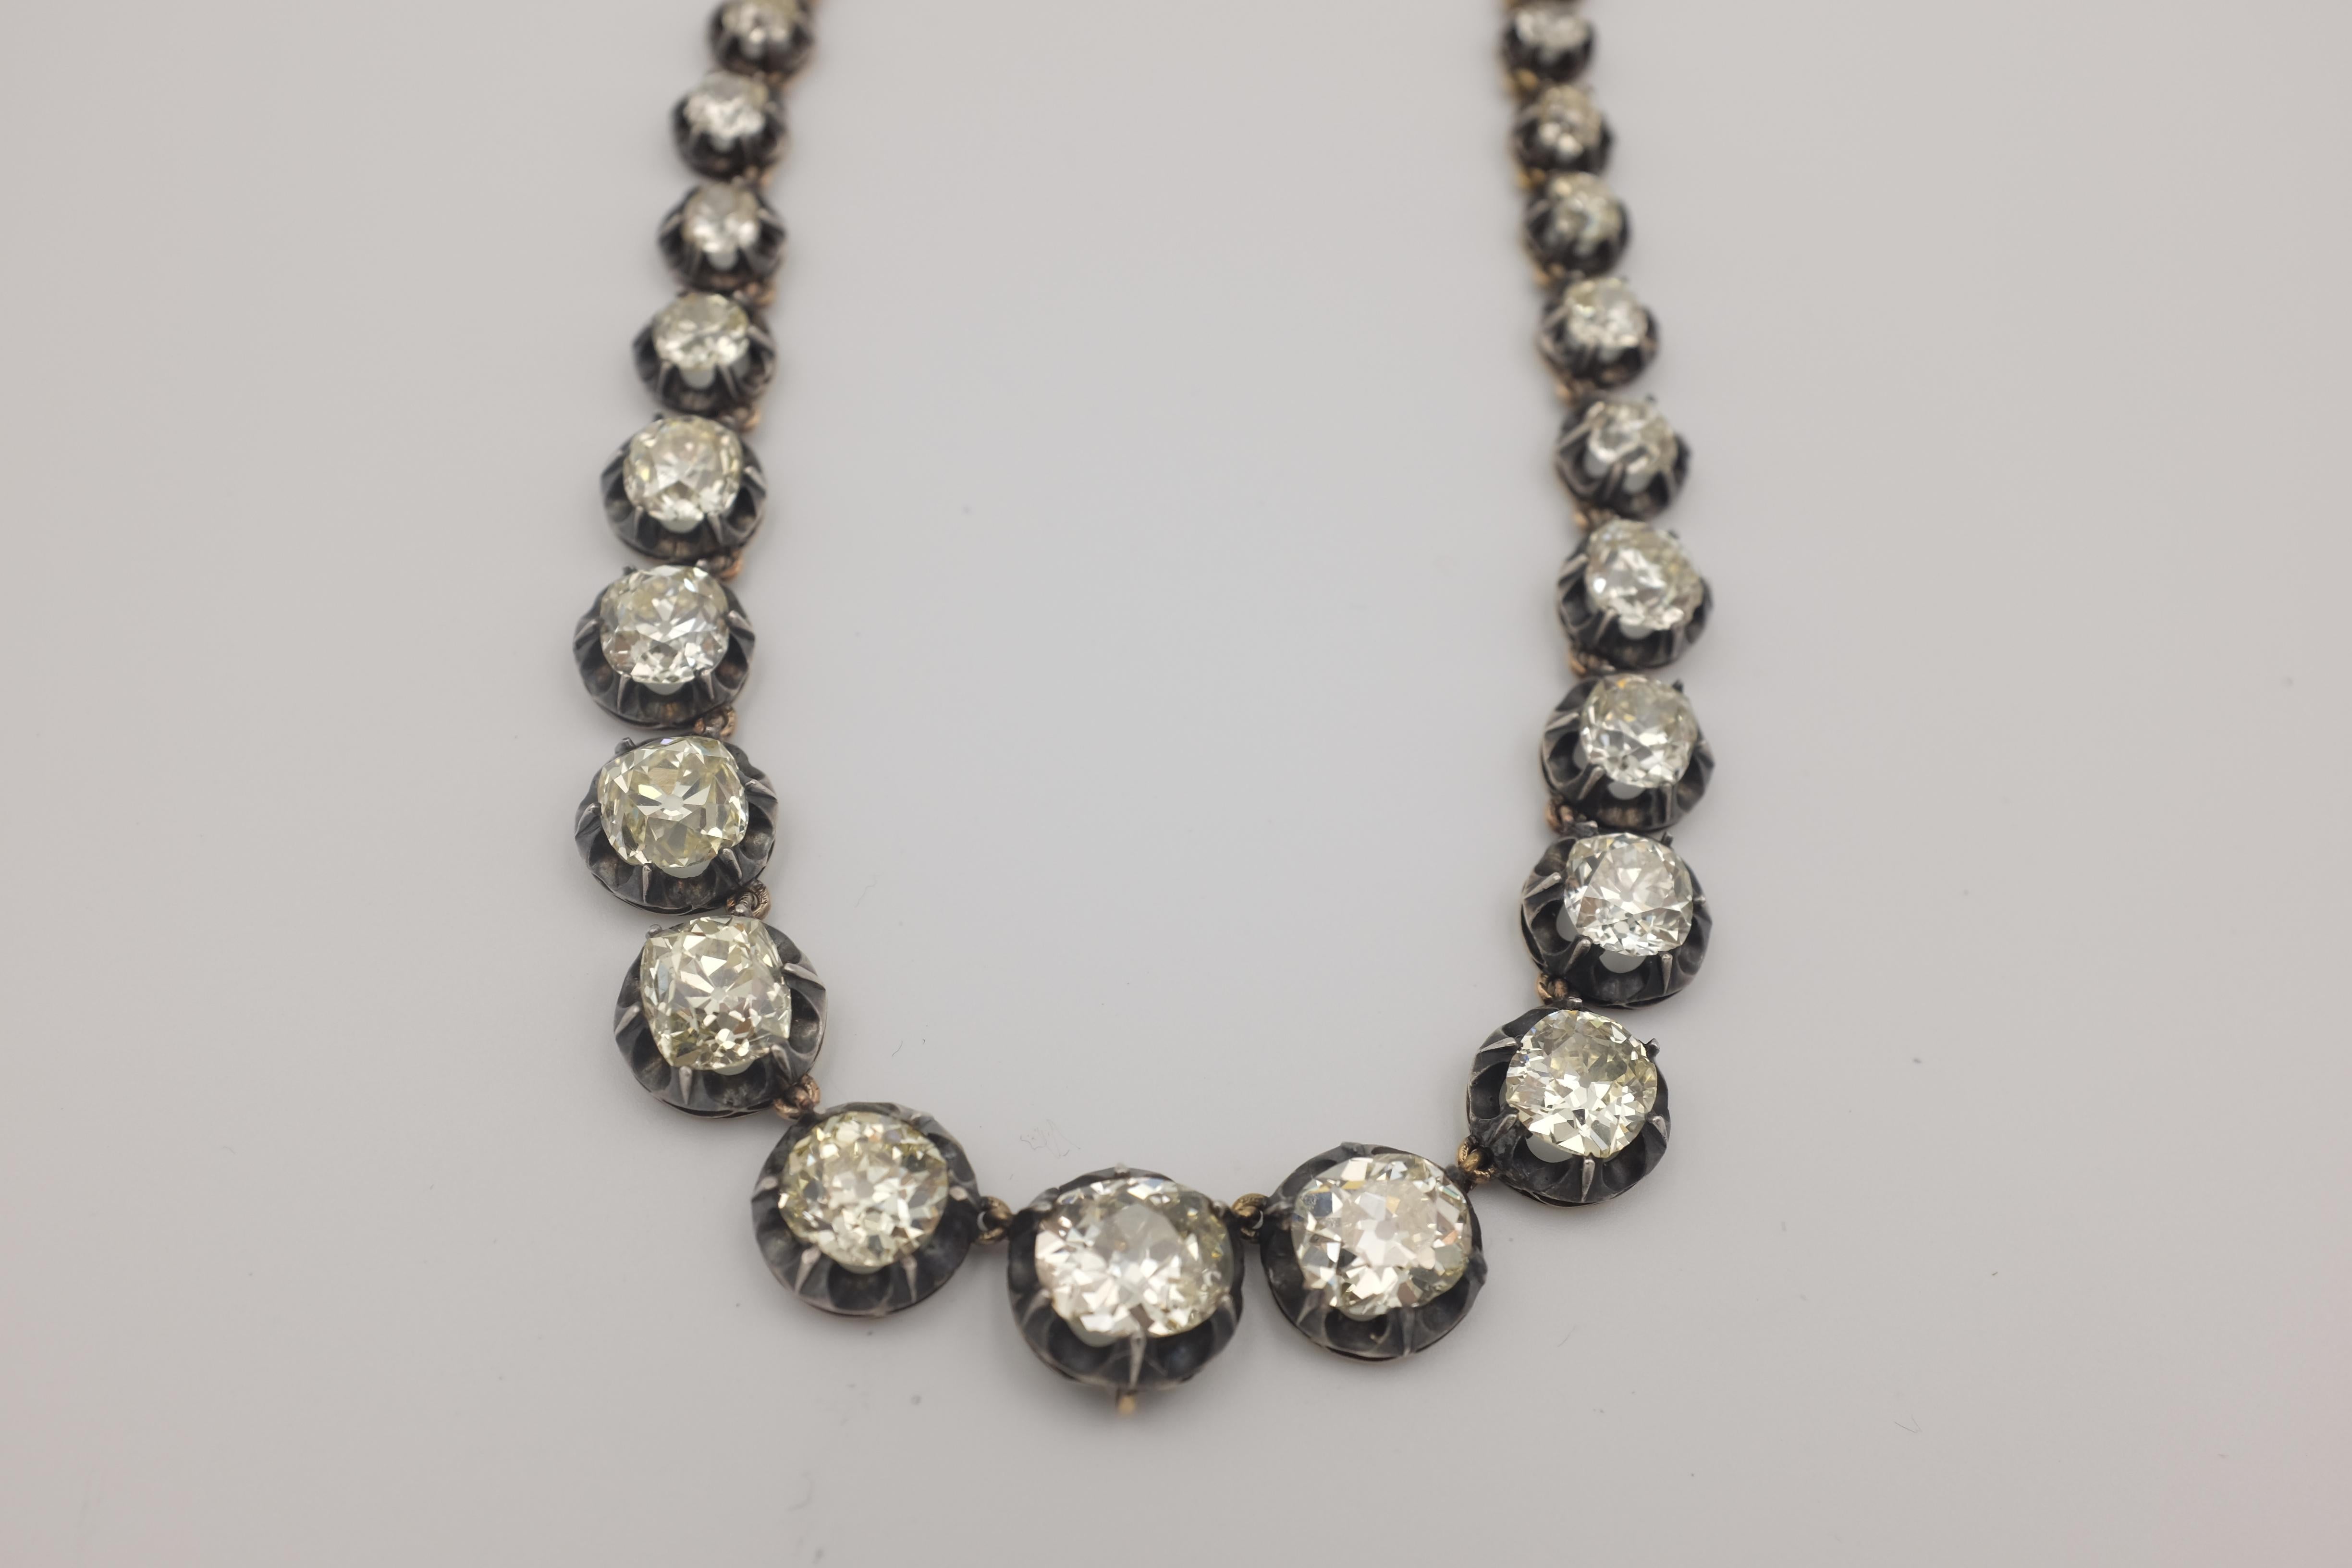 Impressive Victorian Diamond Riviere Necklace of40 collet-mounted old cut diamonds in original Victorian setting.  Majority of stones are VS or better. H-I color to L-M, light cape at warmest.  